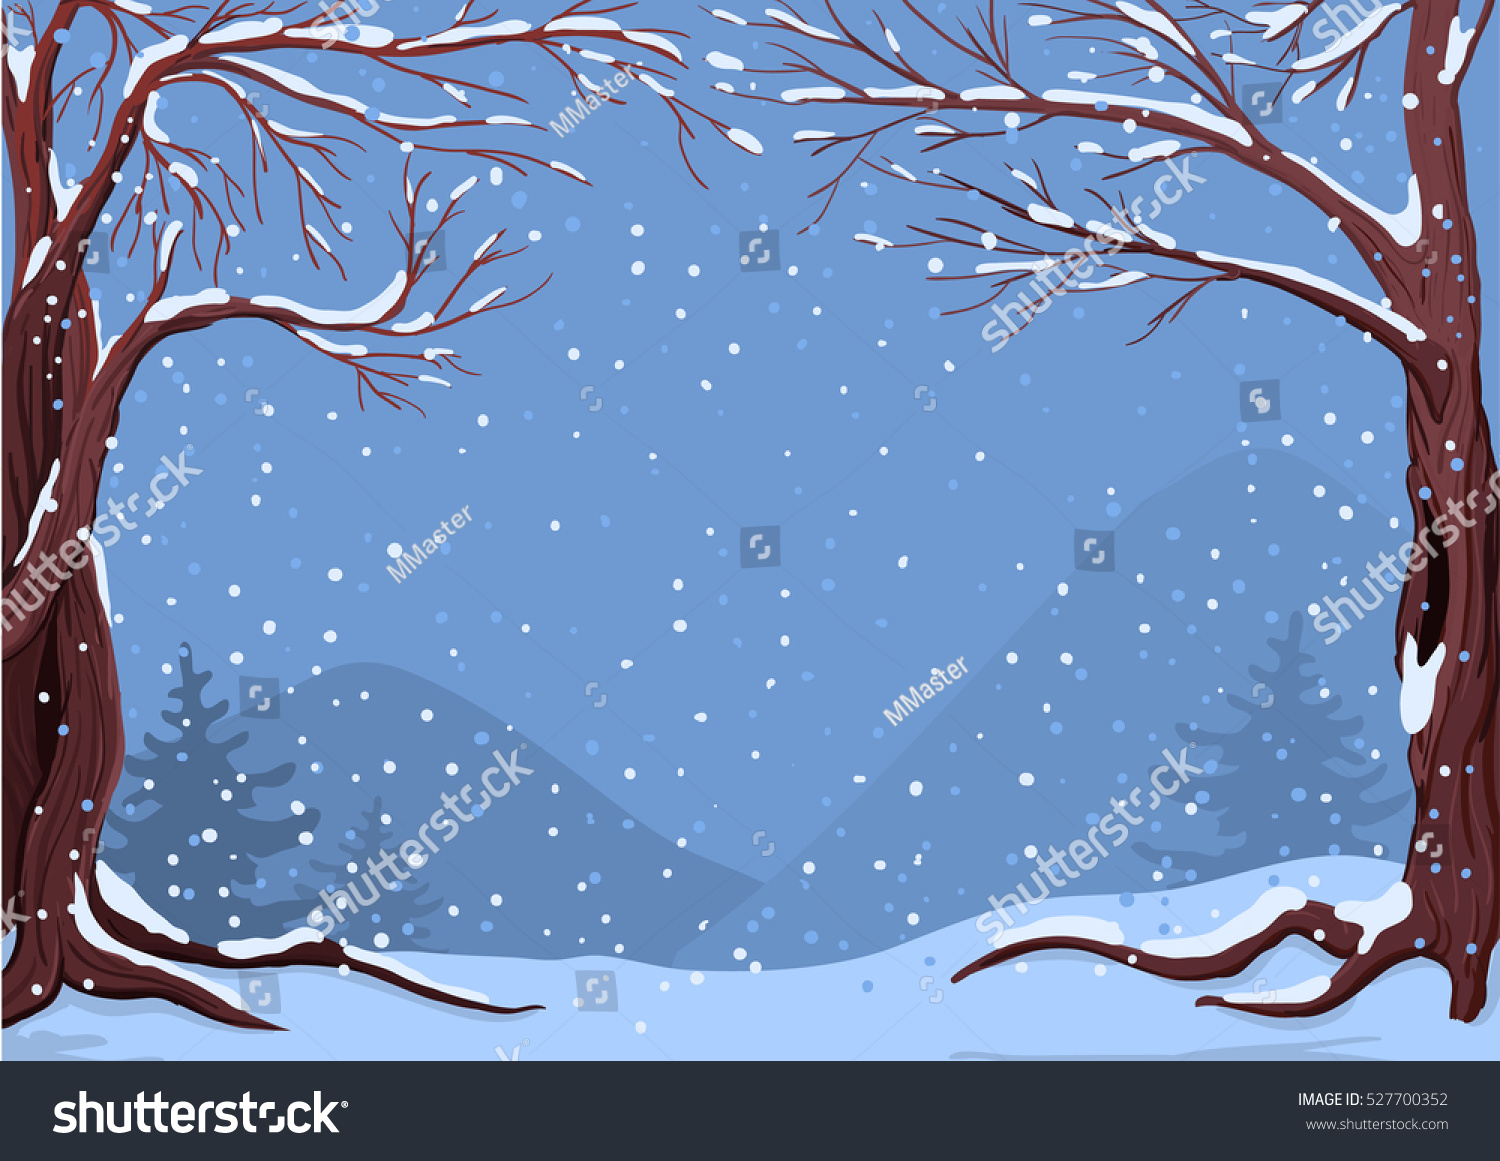 Winter Scene With Falling Snow In The Forest Stock Vector Illustration